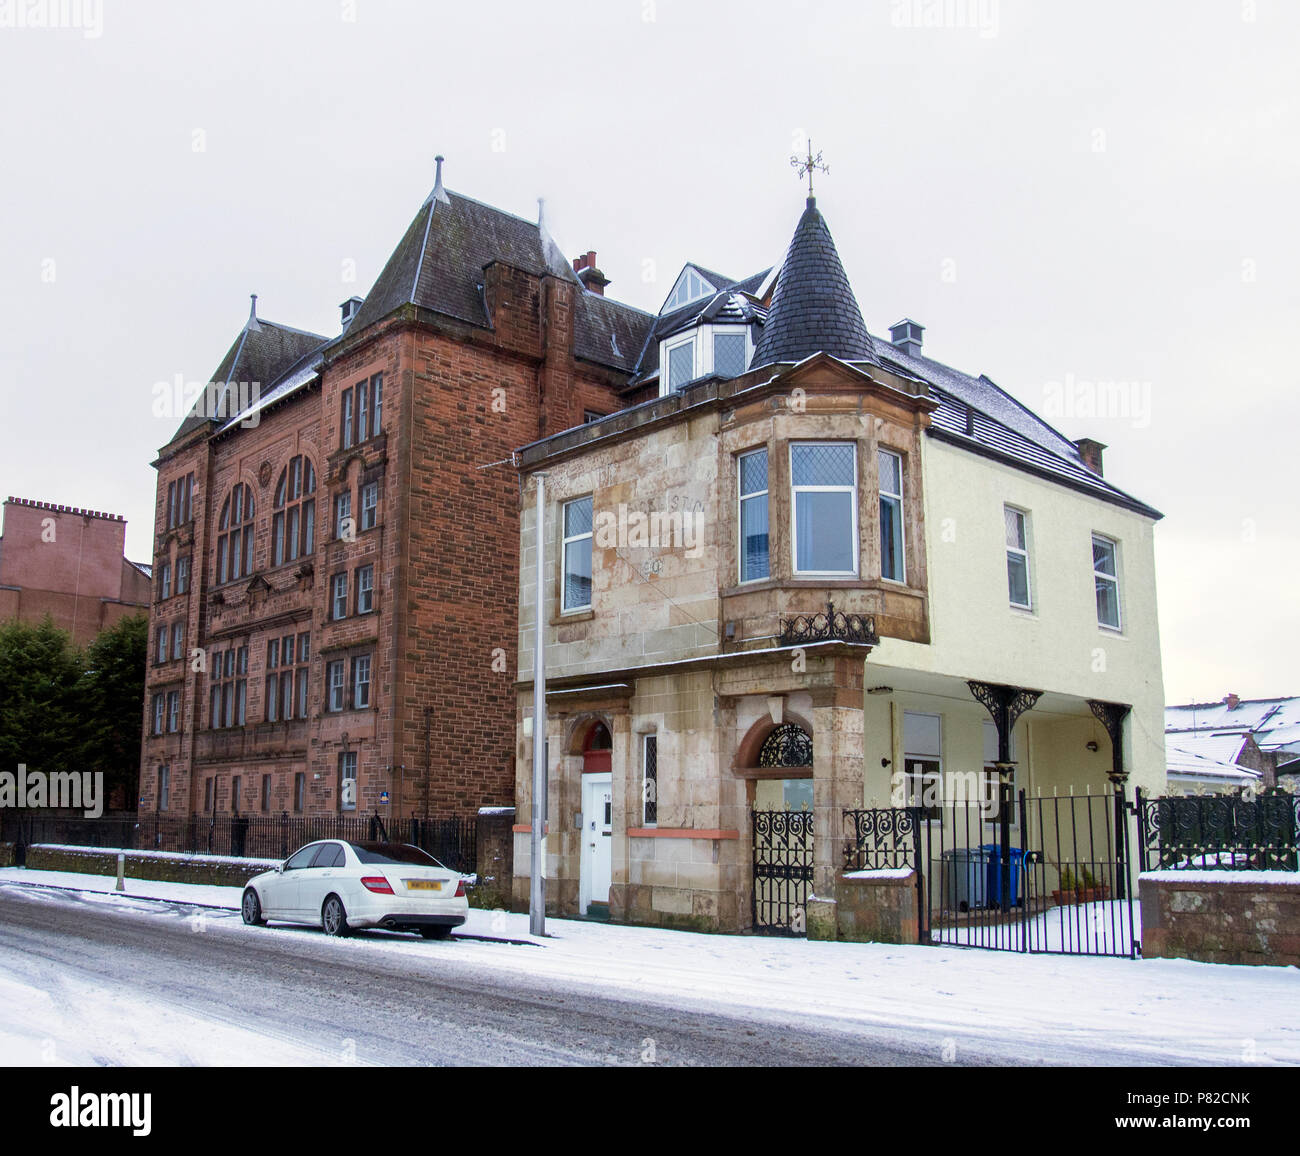 RUTHERGLEN, SCOTLAND - DECEMBER 29 2017: The back view of the Old Burgh Primary School and the Rutherglen Evangelistic Institute. Stock Photo